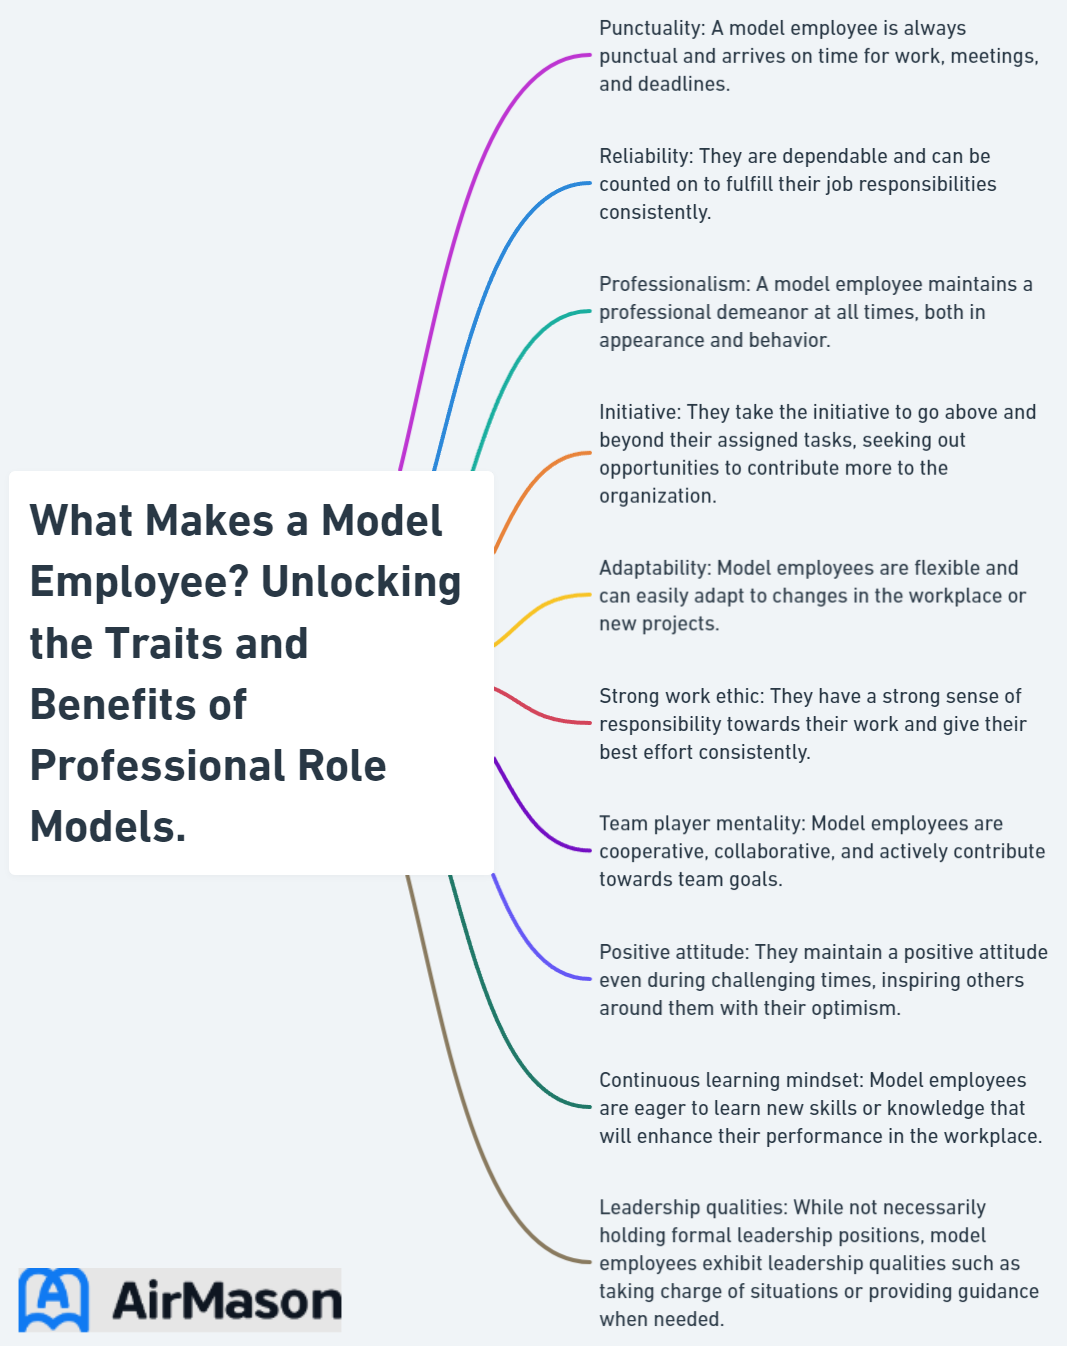 What Makes a Model Employee? Unlocking the Traits and Benefits of Professional Role Models.